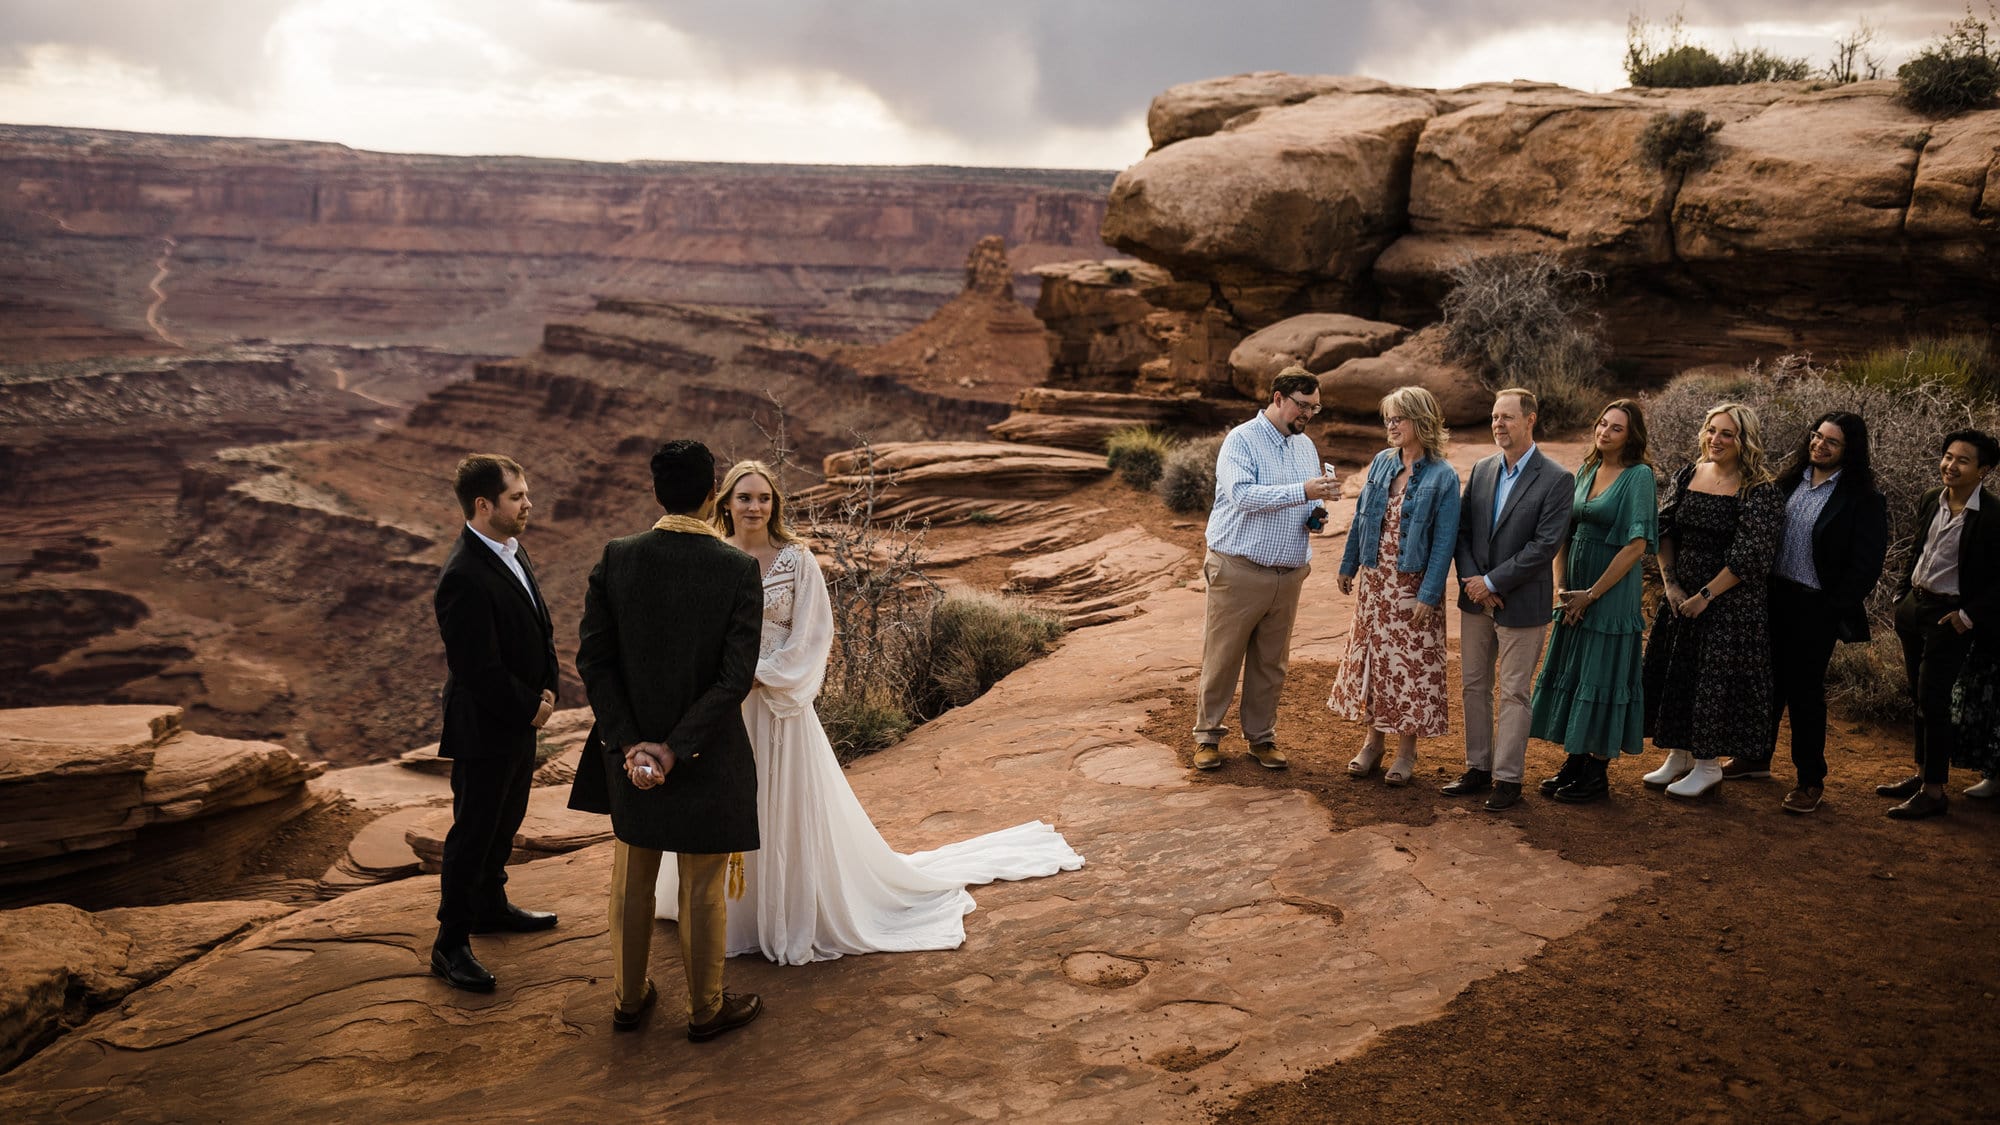 This Dead Horse Point wedding was truly epic with one of the best sunsets I've seen. Plus couple style goals? You have to check this one out.